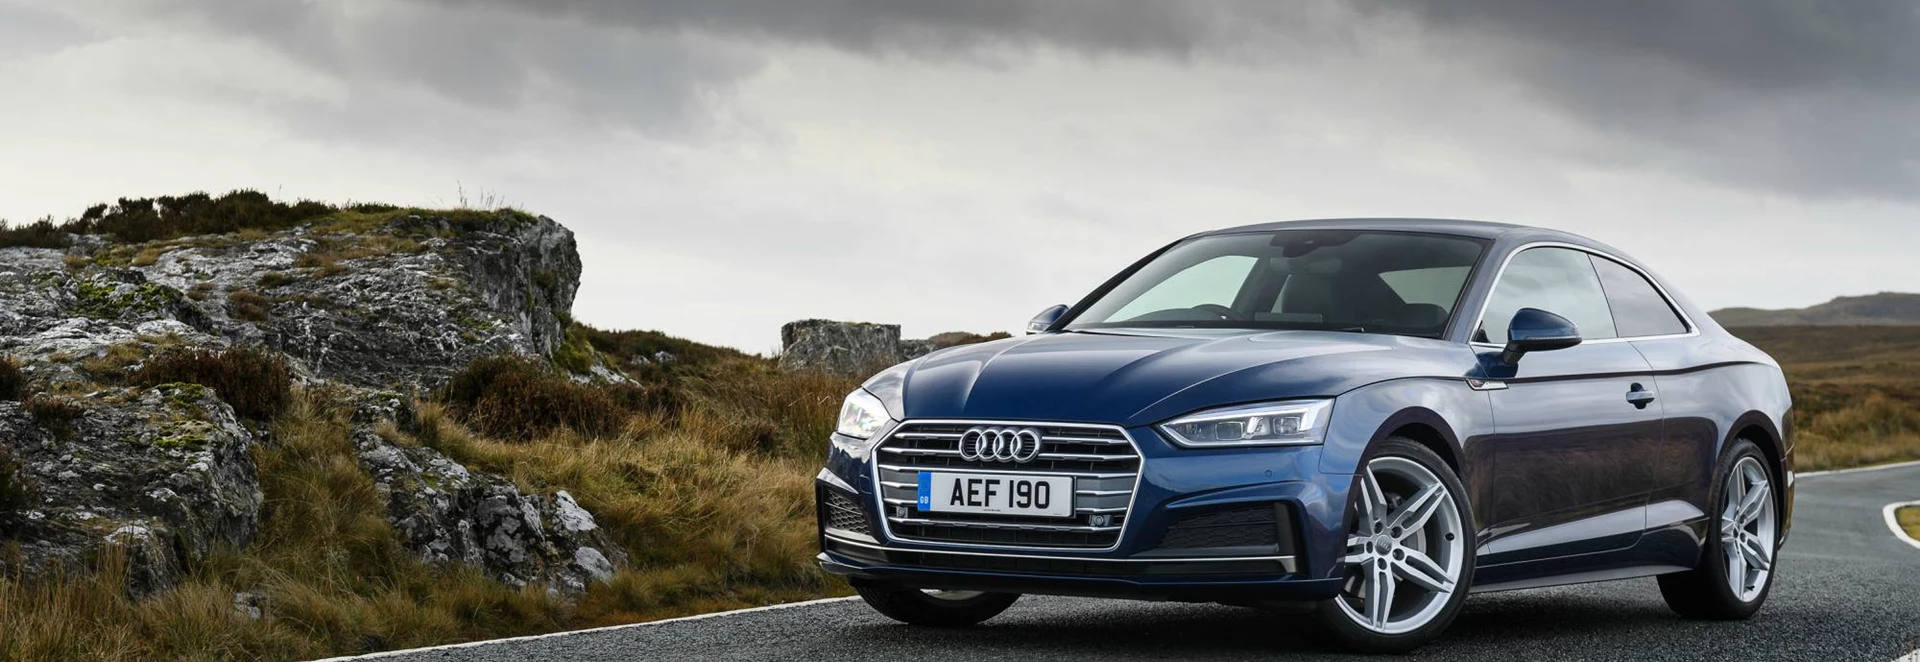 Audi A5 Coupe S Line 2.0 TDI review 